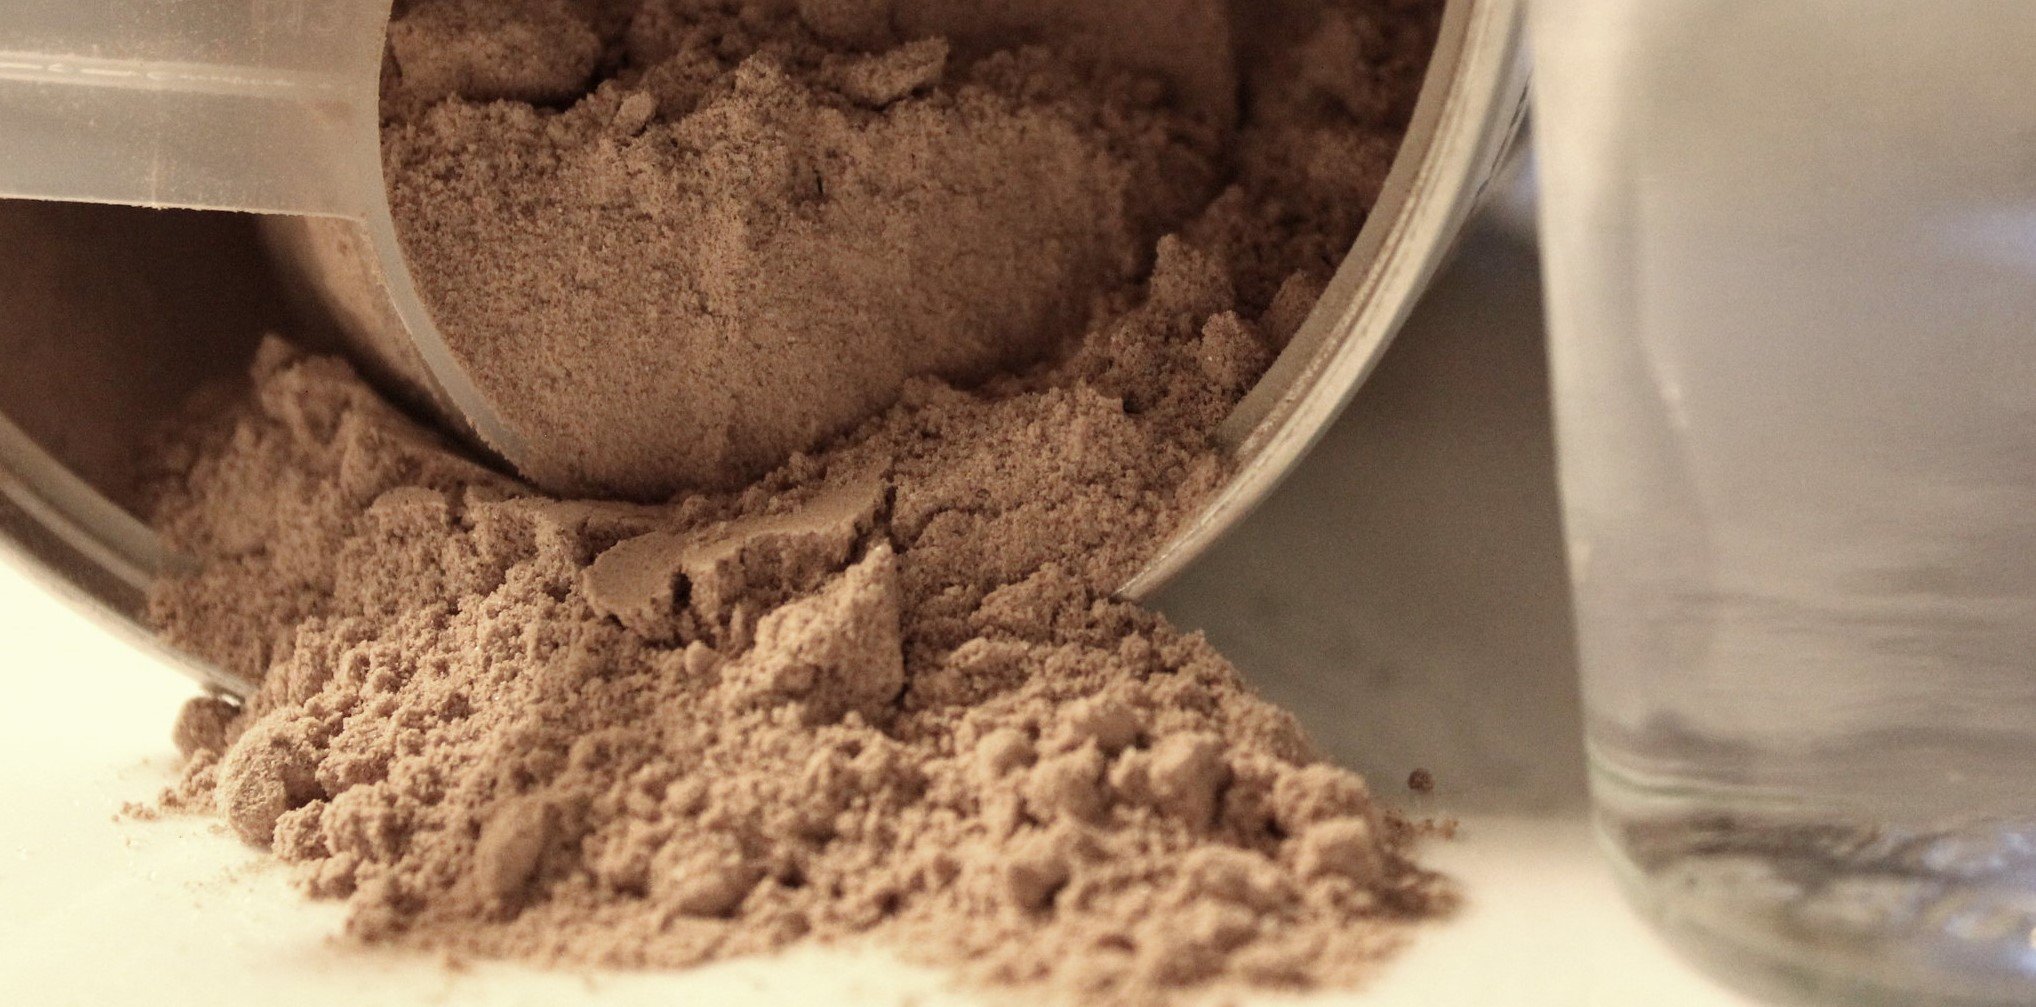 If you're trying to build muscle on a plant-based diet, some plant protein powder might be a good idea.